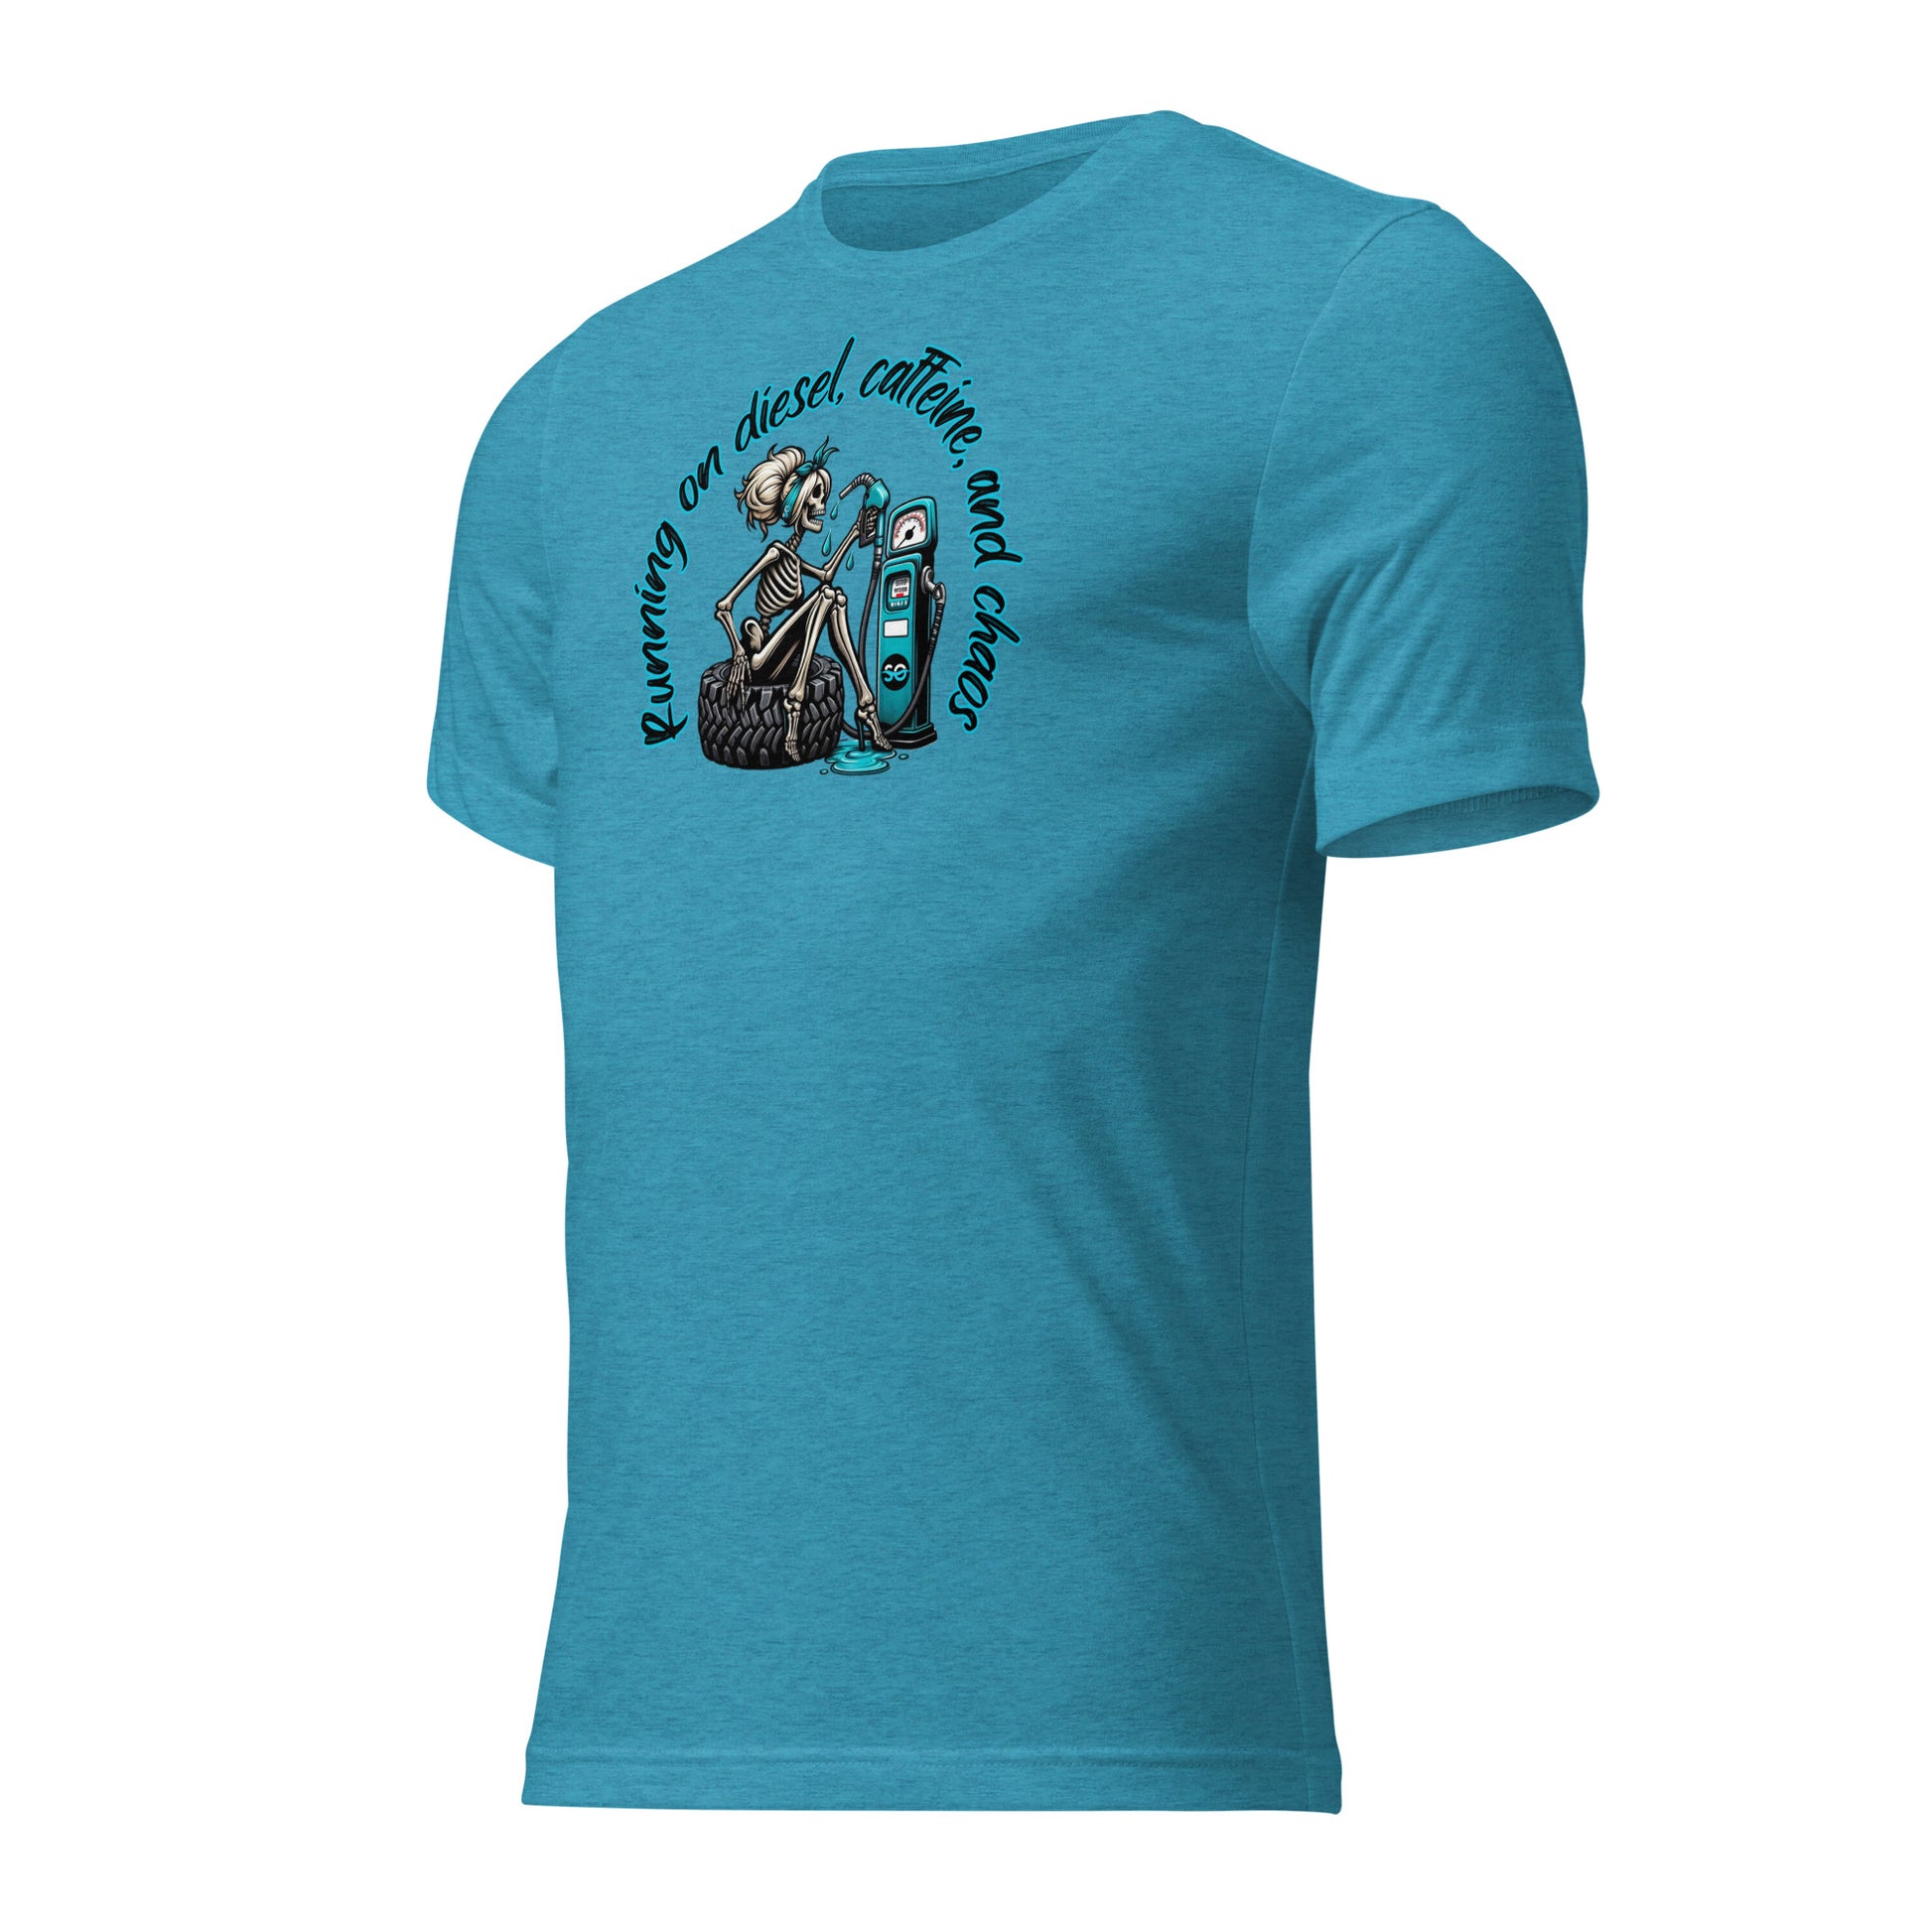 a blue t - shirt with an image of a skeleton holding a guitar